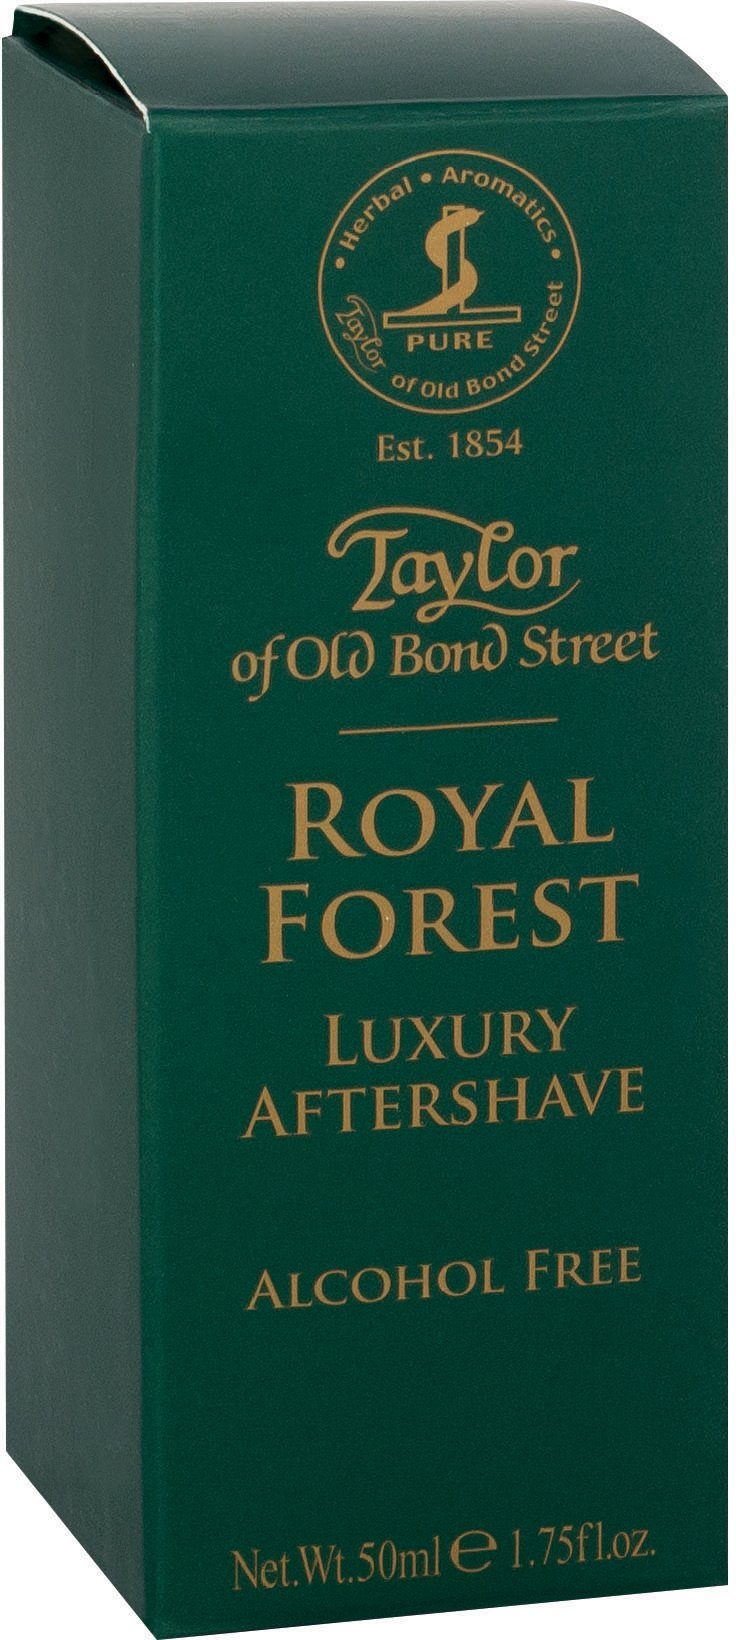 Forest Aftershave Taylor After-Shave of Old Bond Luxury Street Royal